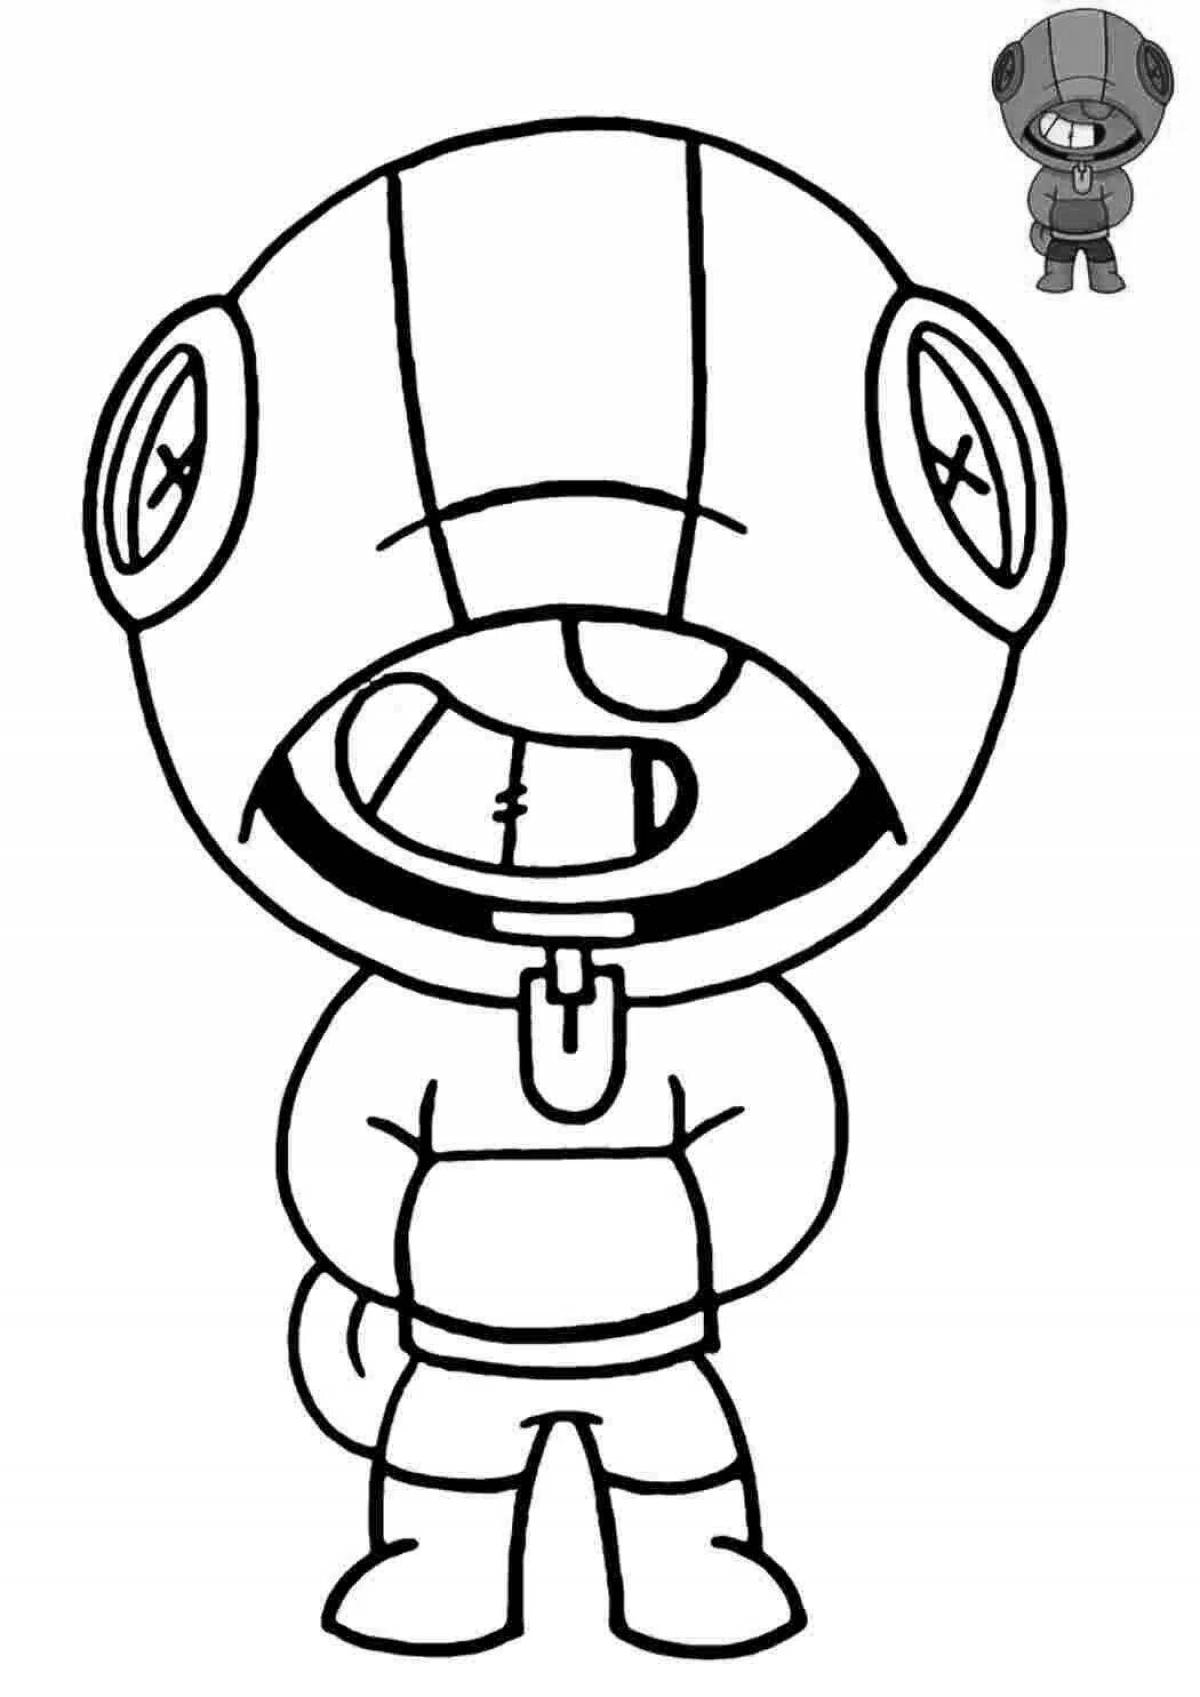 Leon's playful coloring page for boys